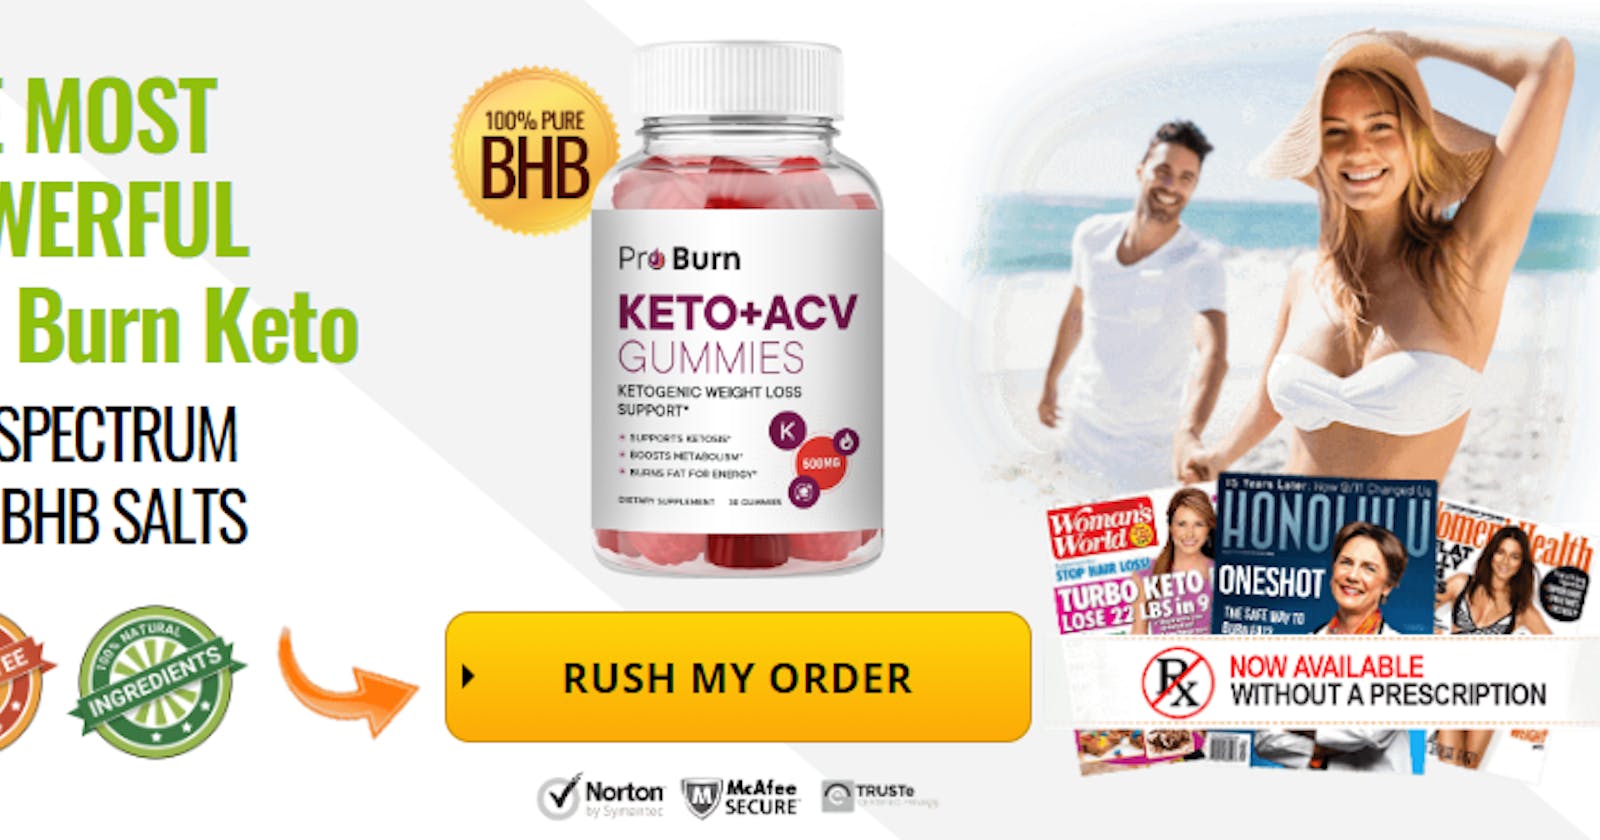 Pro Burn Keto Gummies: Can They Help You Achieve Your Weight Loss Goals?